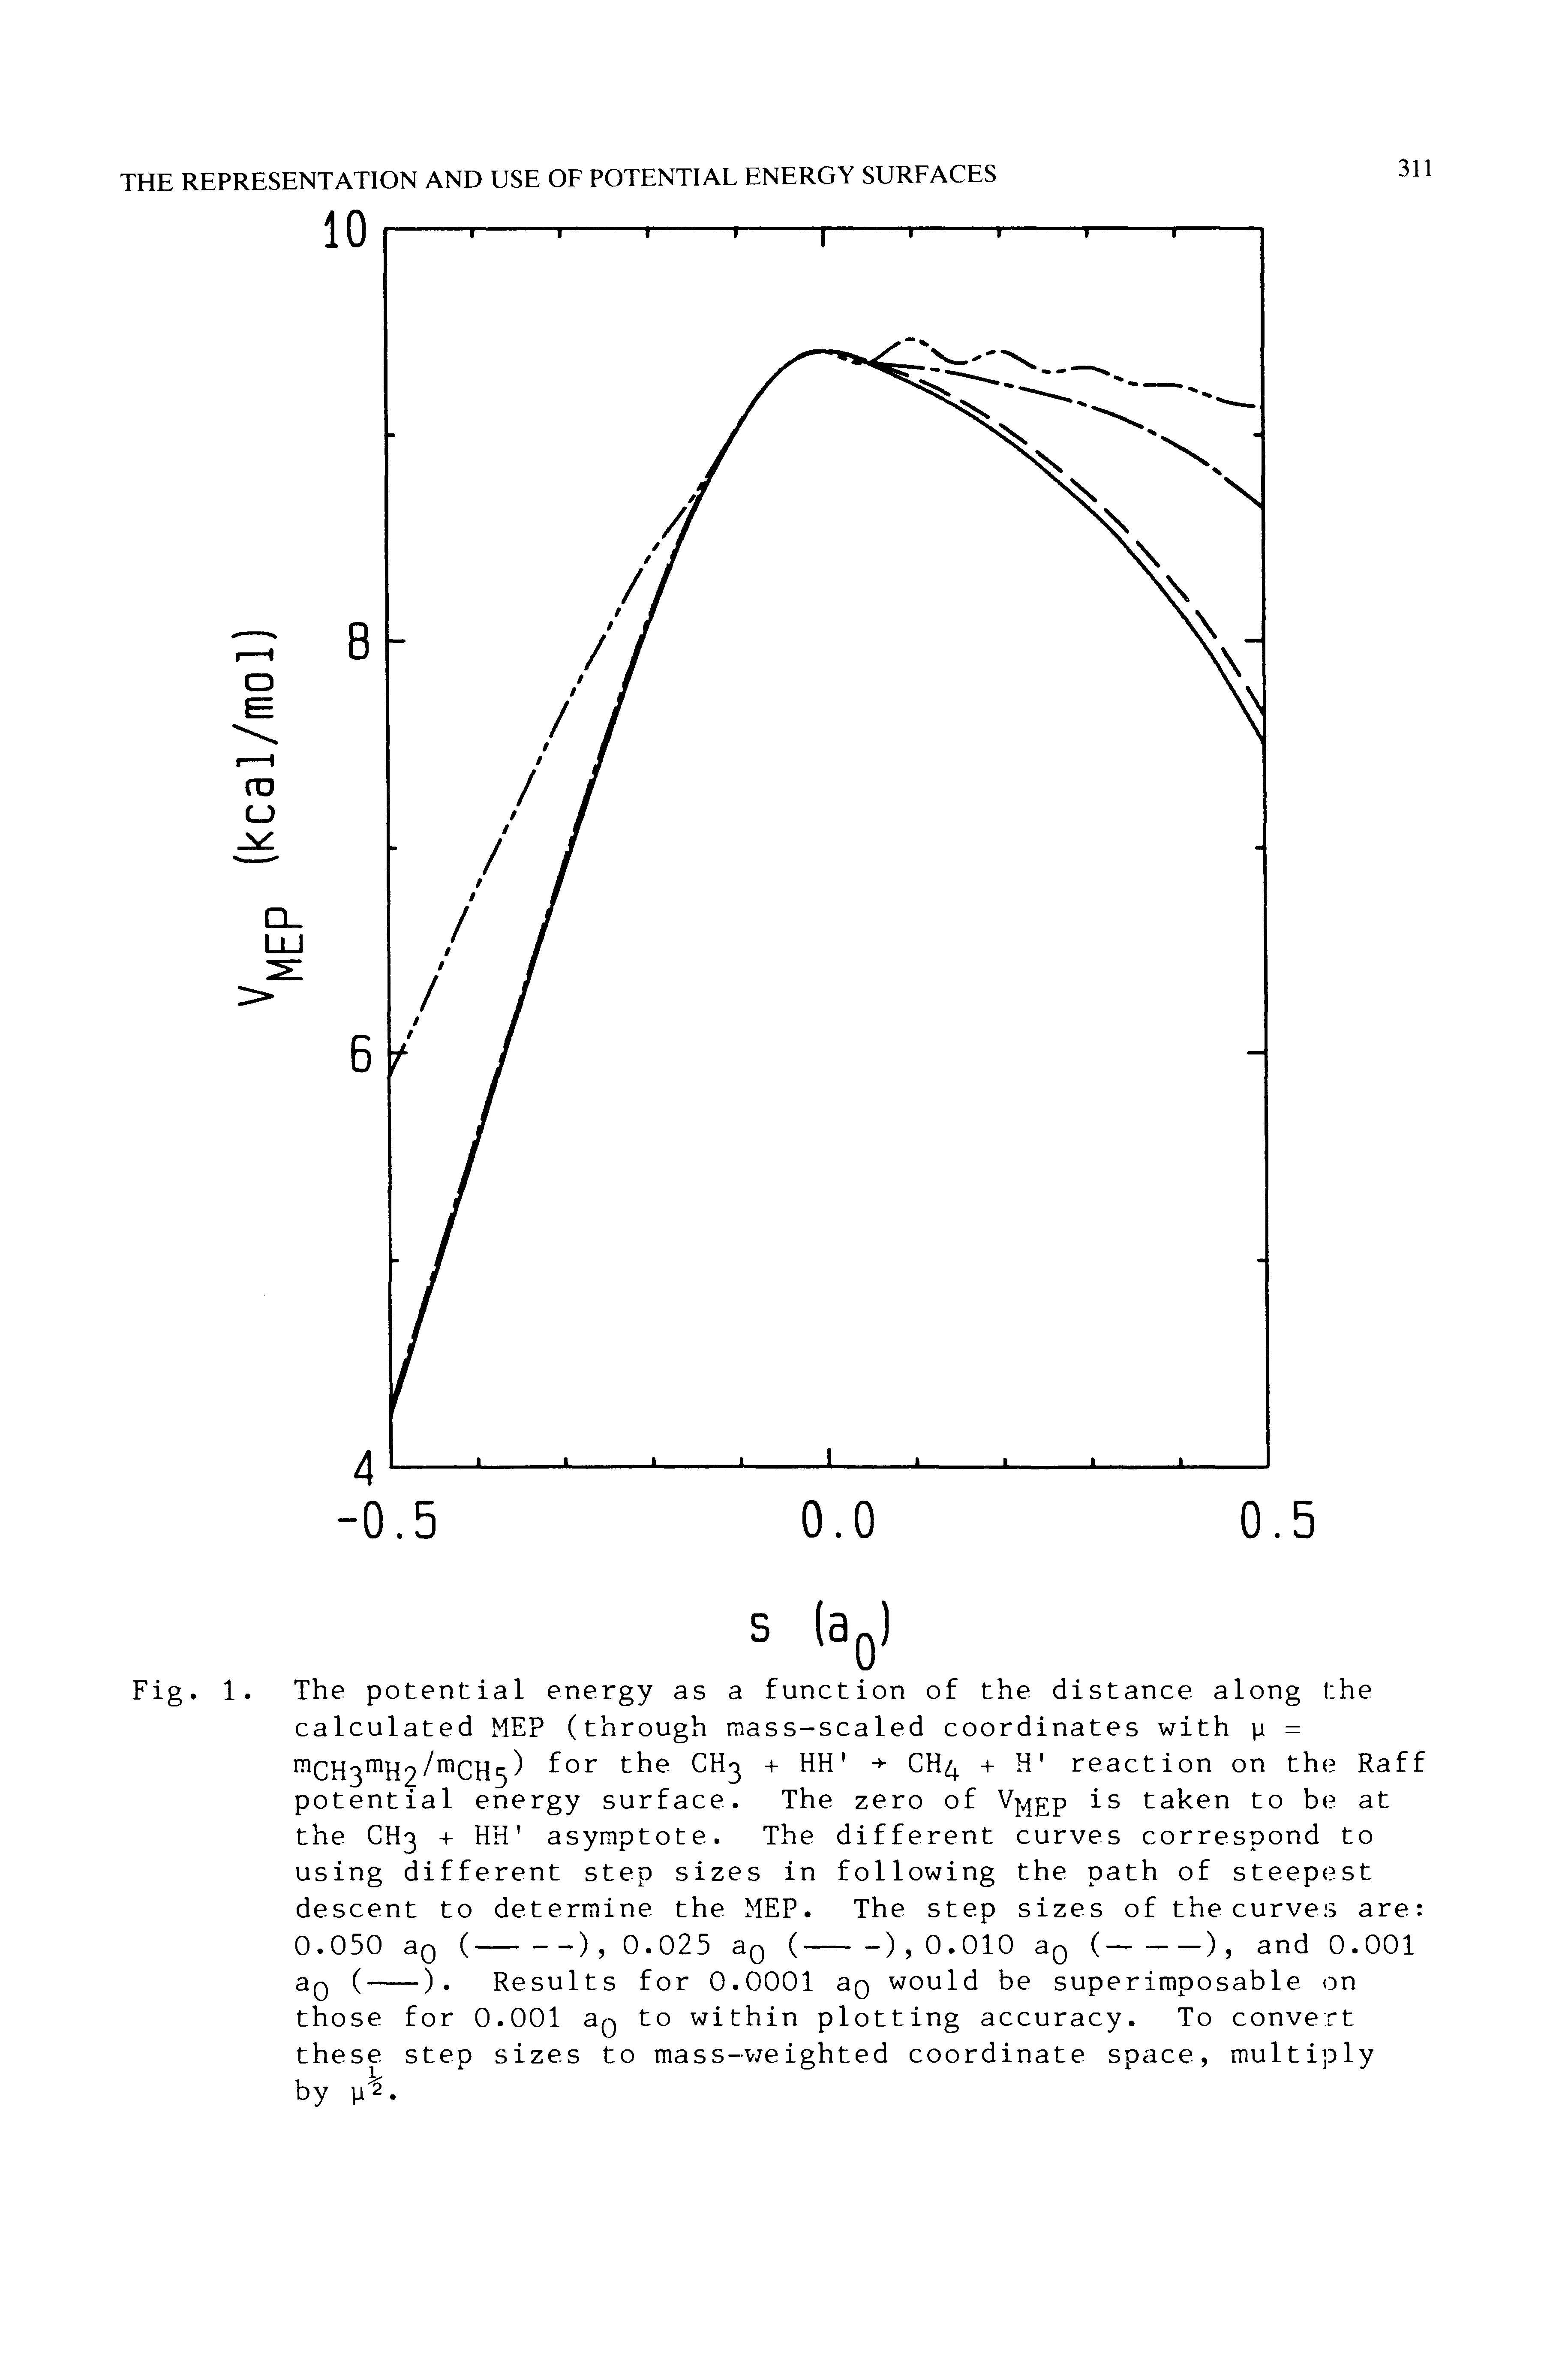 Fig. 1. The potential energy as a function of the distance along the calculated MEP (through mass-scaled coordinates with p =...